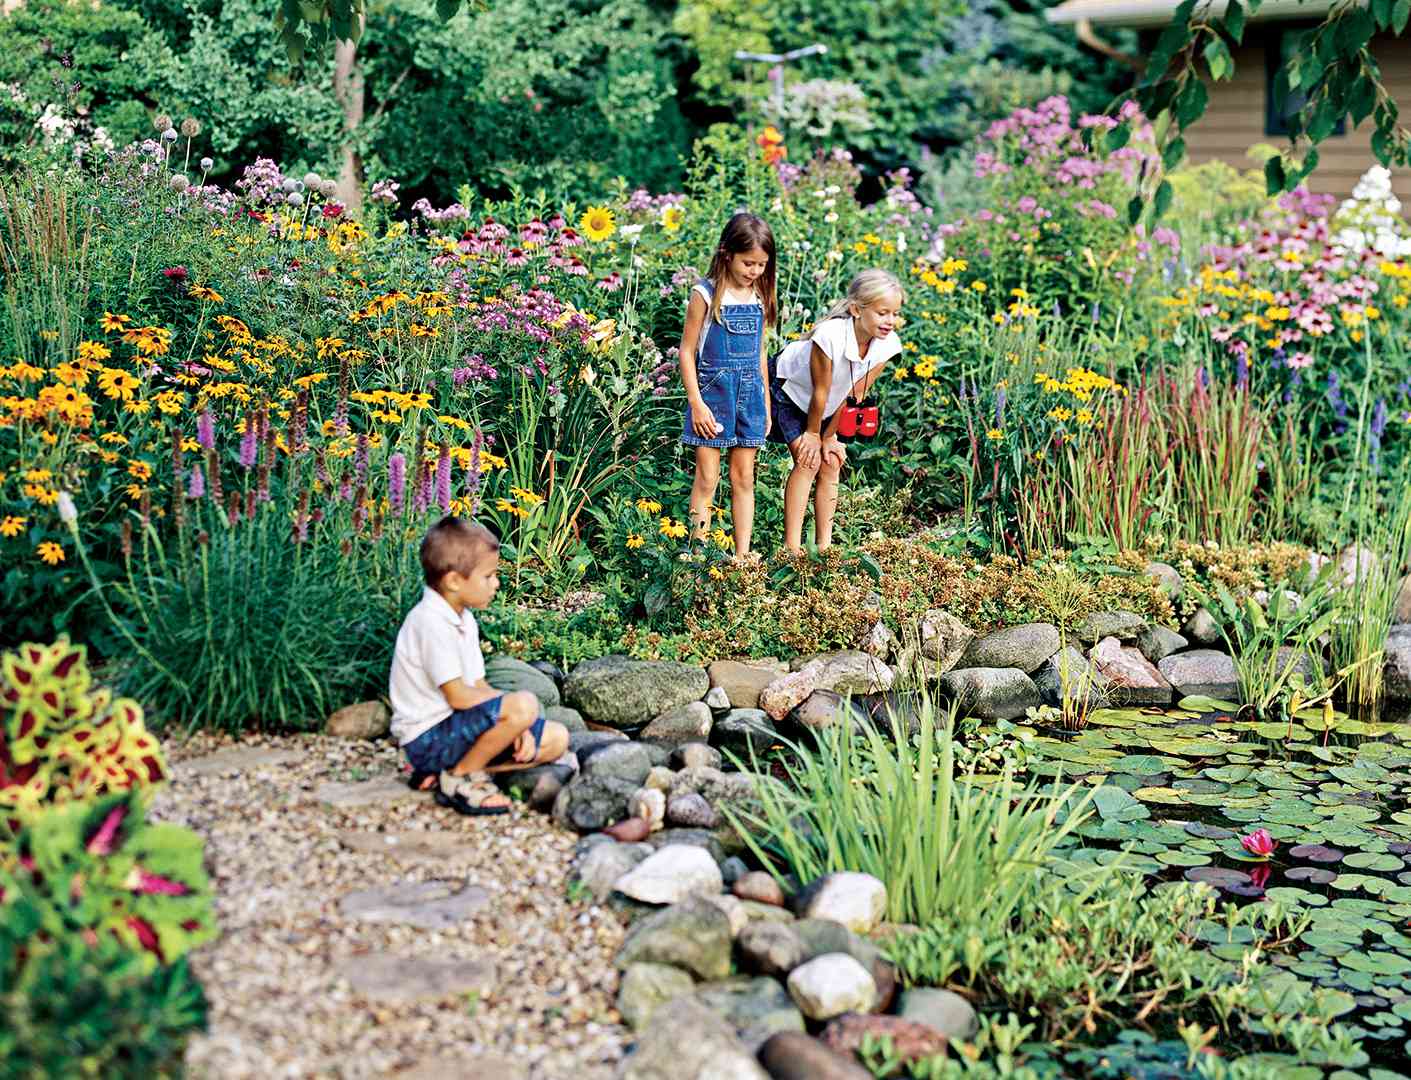 children next to pond with lily pads